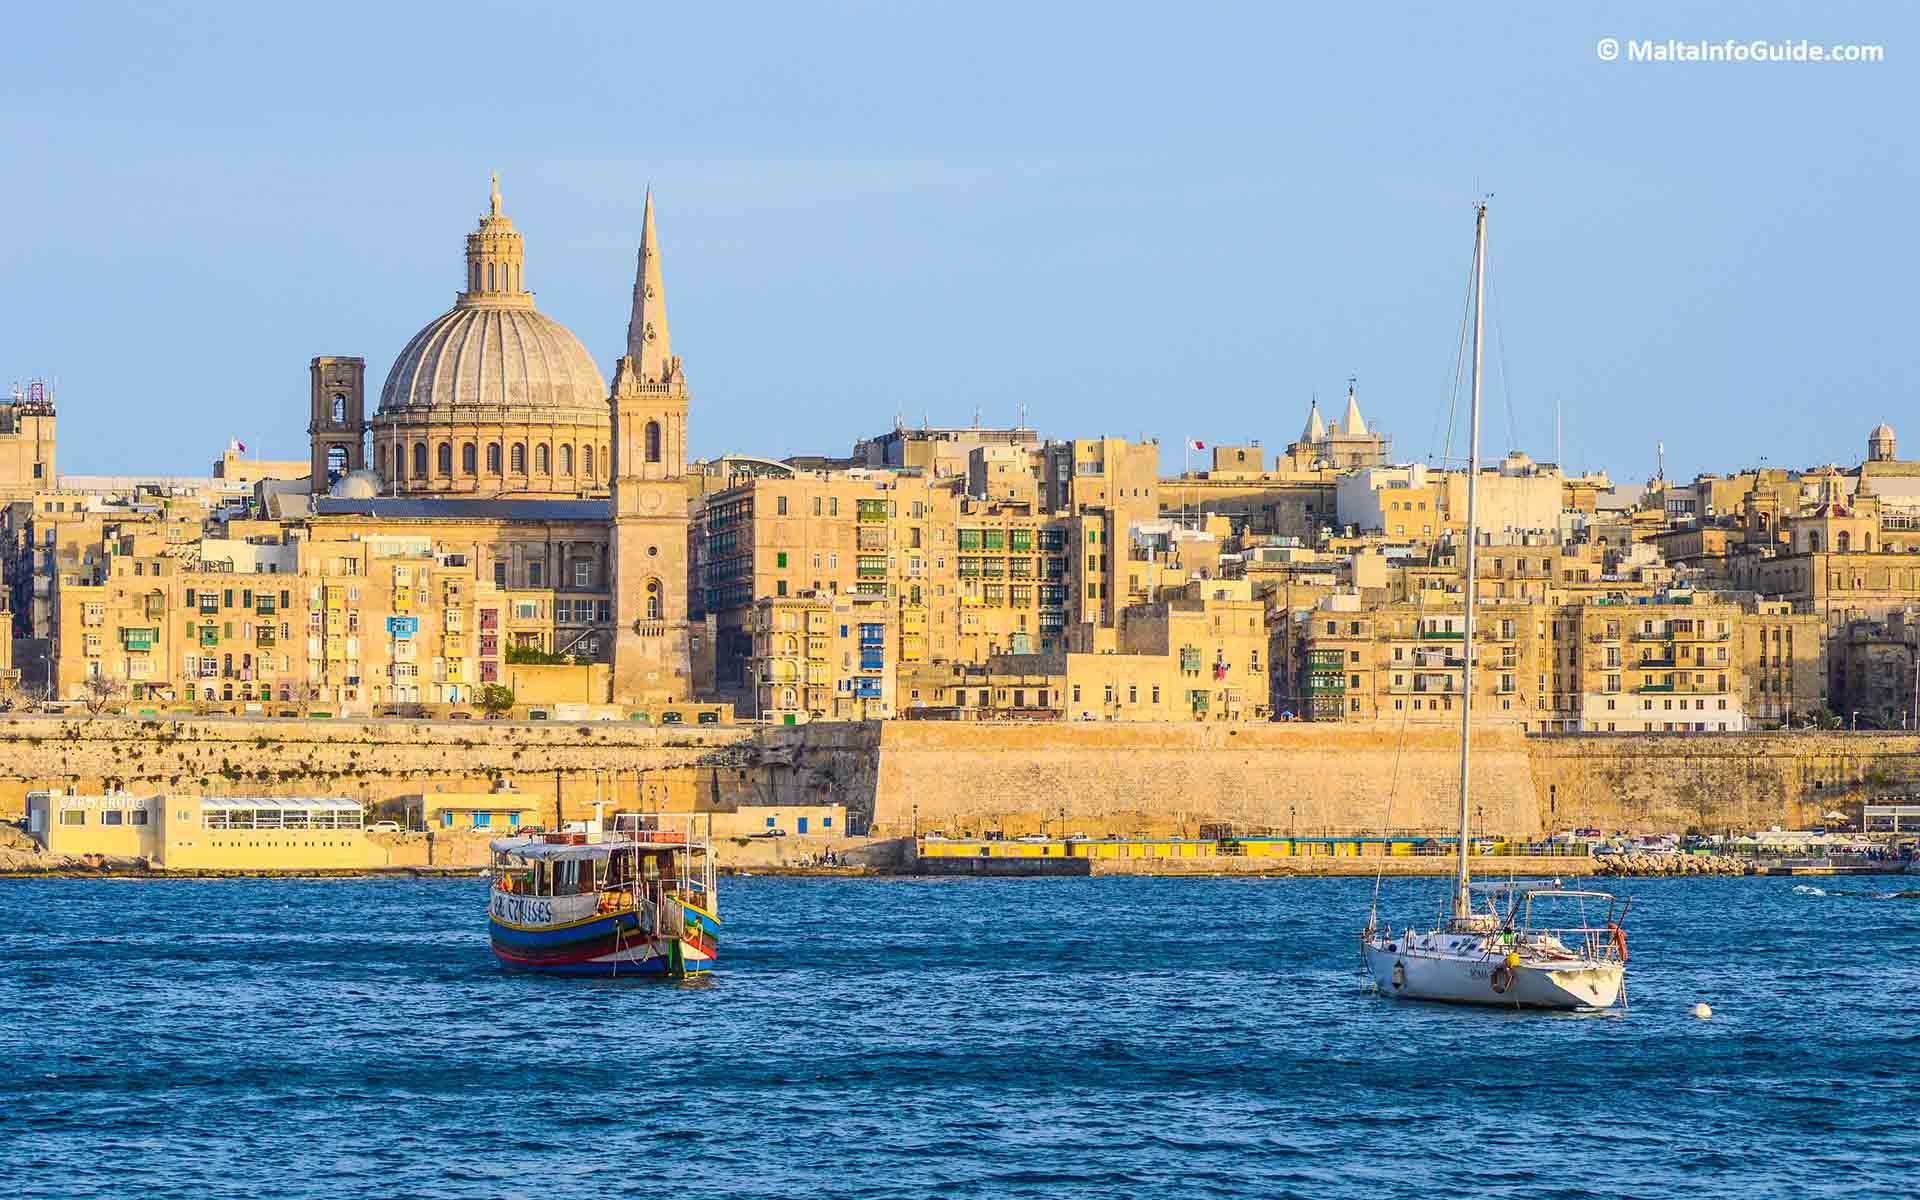 The view of Valletta from Sliema.